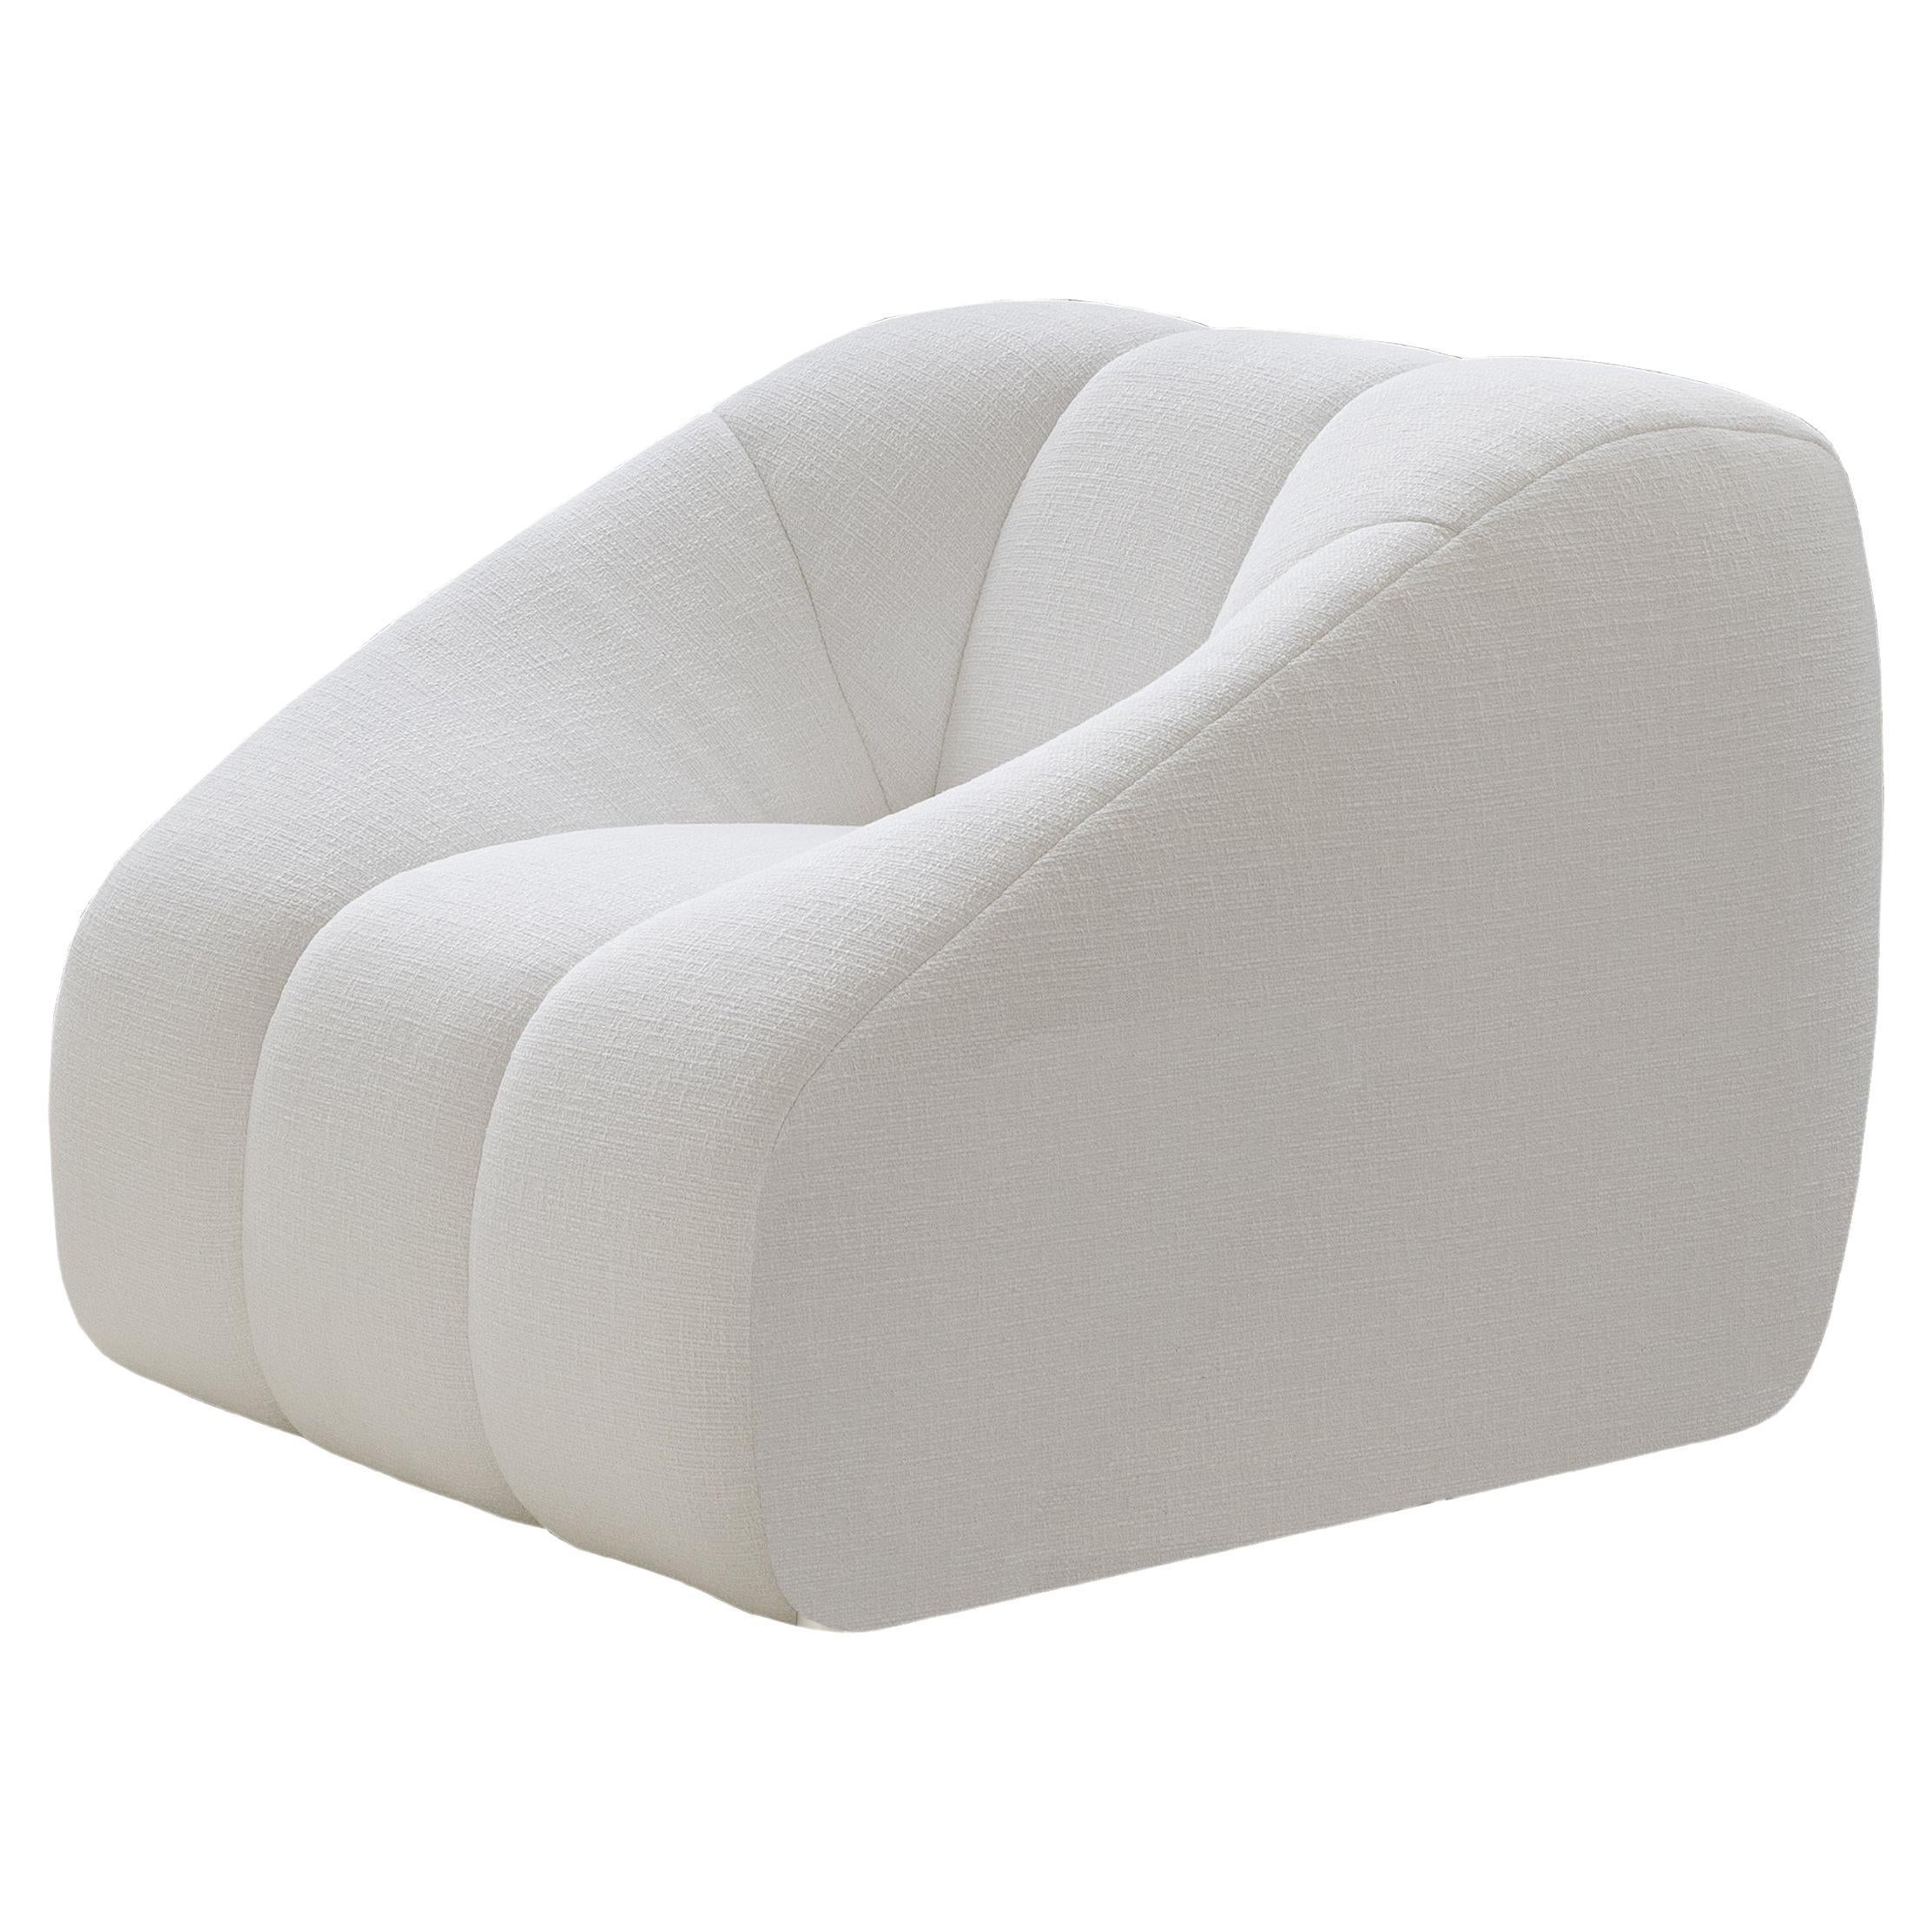 NEW armchair in white fabric. By Legame Italia For Sale